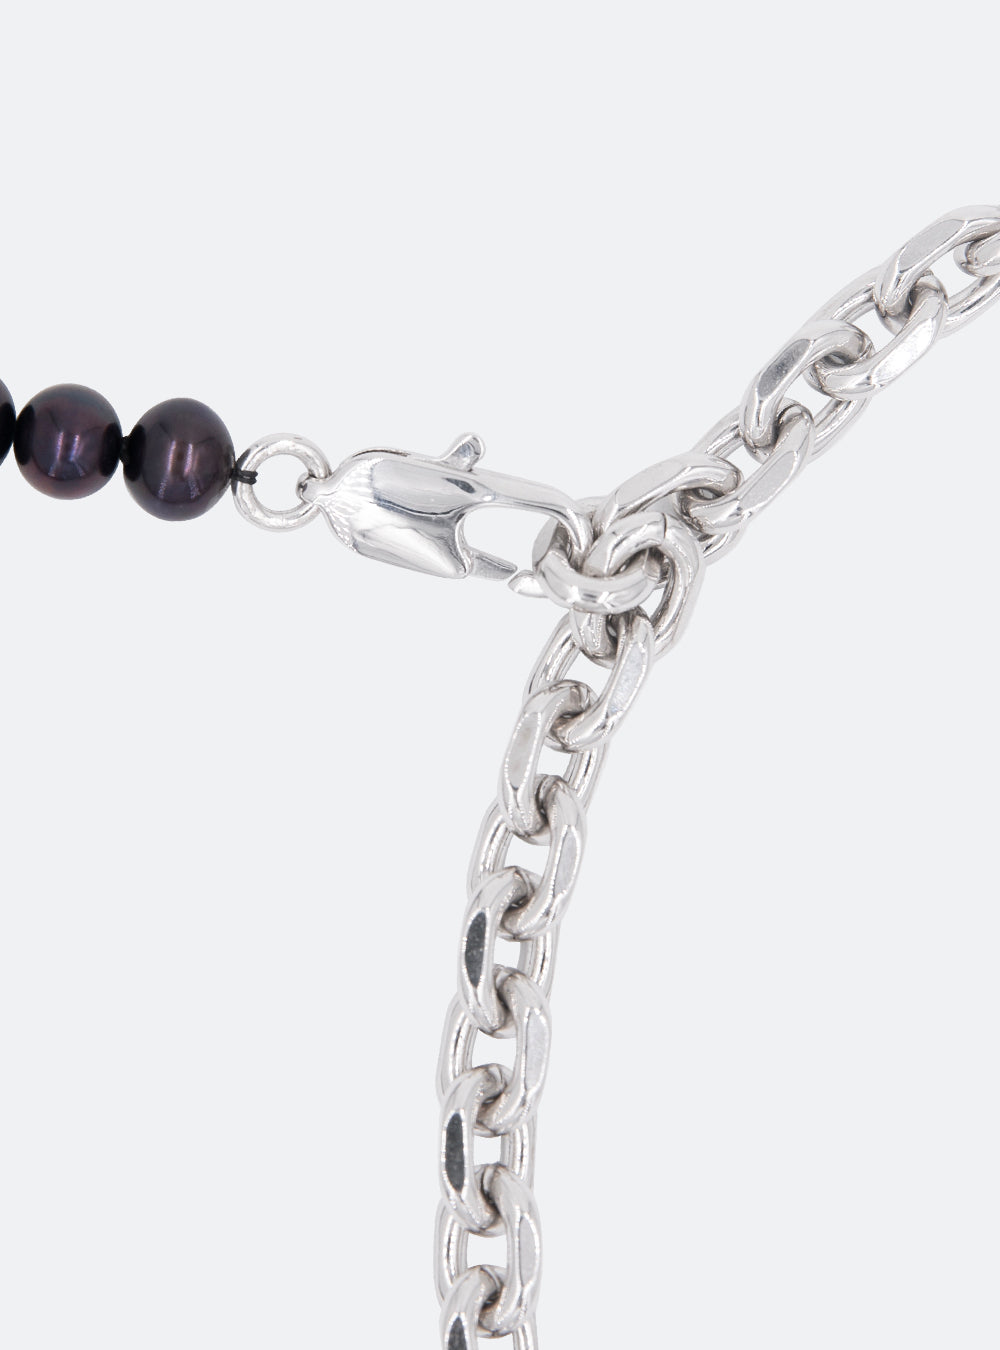 A Micro-SD black freshwater pearls necklace featuring black freshwater pearls on a rhodium-plated brass chain - [Pre-order] from MIDNIGHTFACTORY.